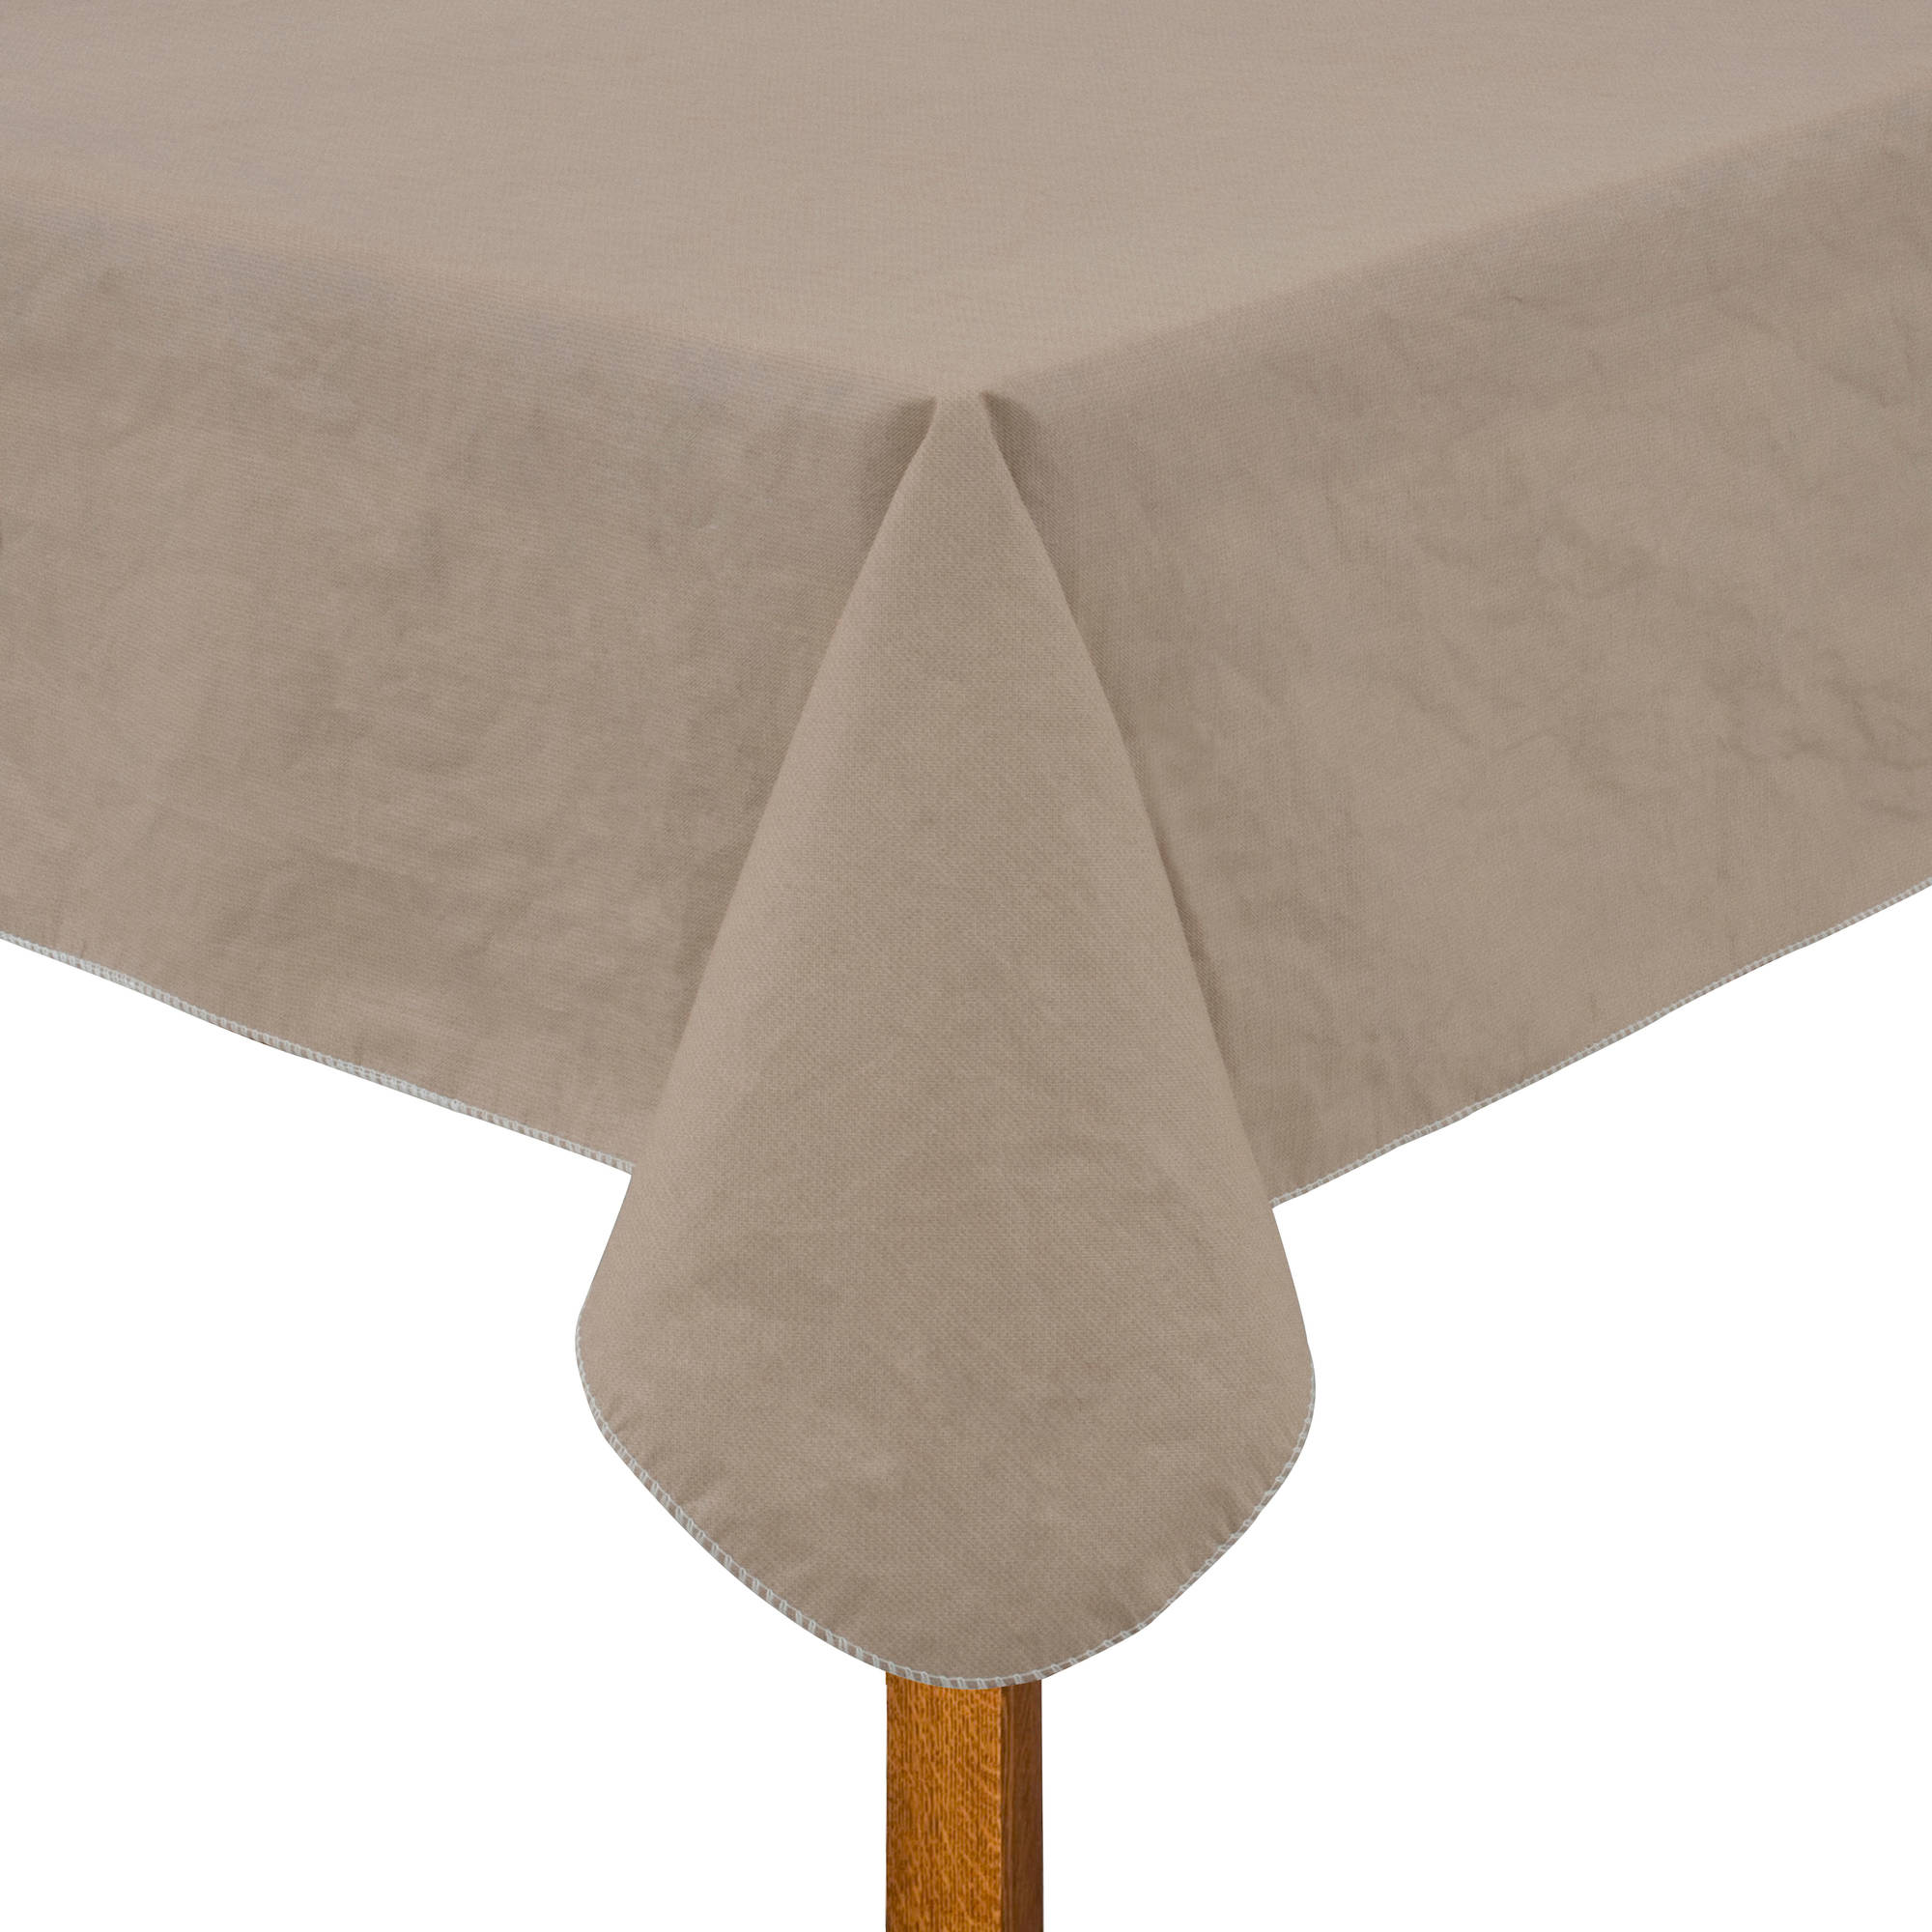 mainstays tablecloth brown round for inch accent table pier one chairs nesting tables wood ottawa decorative pieces dining concrete top outdoor modern kmart desk lamp tall